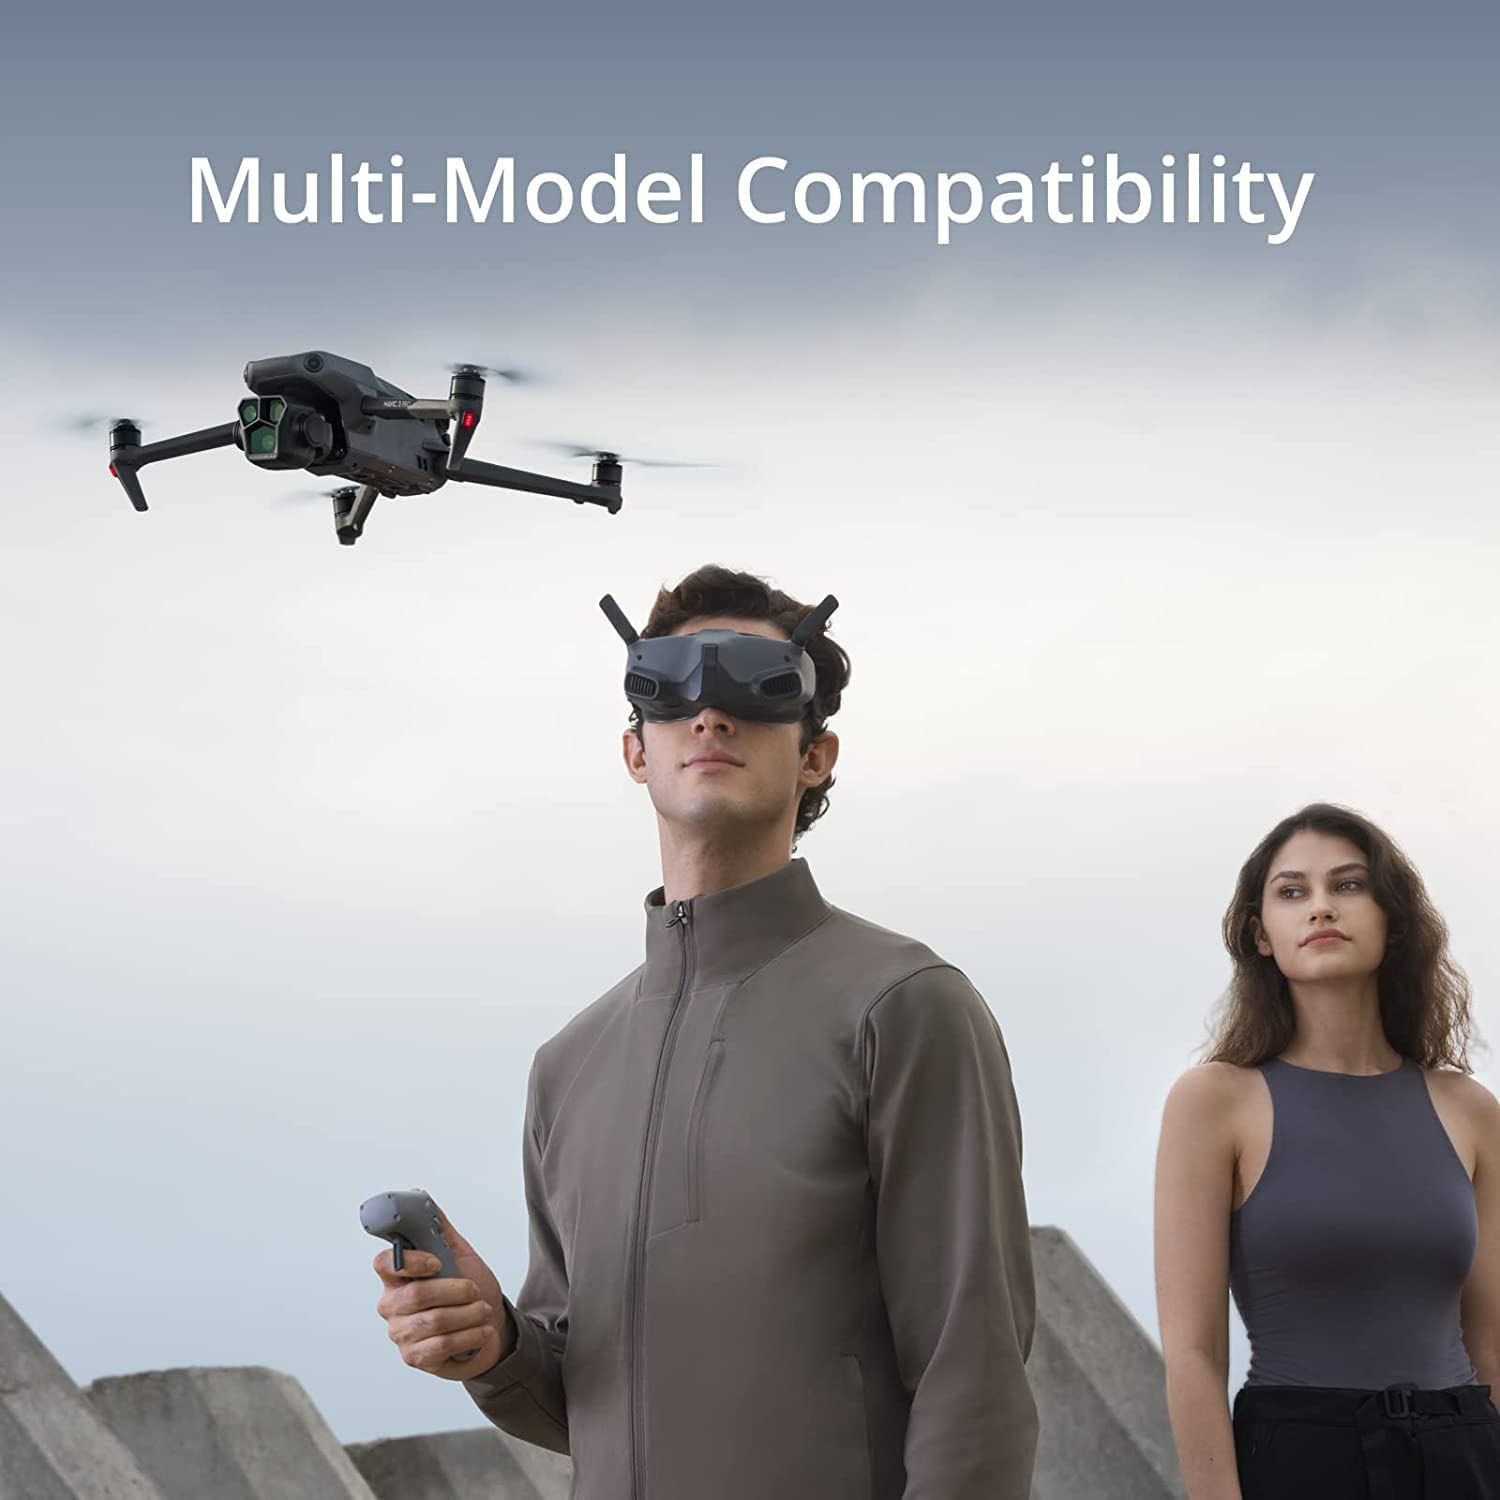 DJI Goggles Integra - Lightweight and Portable FPV Goggles, Integrated Design, Micro-OLED Screens, DJI O3+ Video Transmission, HD Low-Latency, Compatible with DJI Avata and More